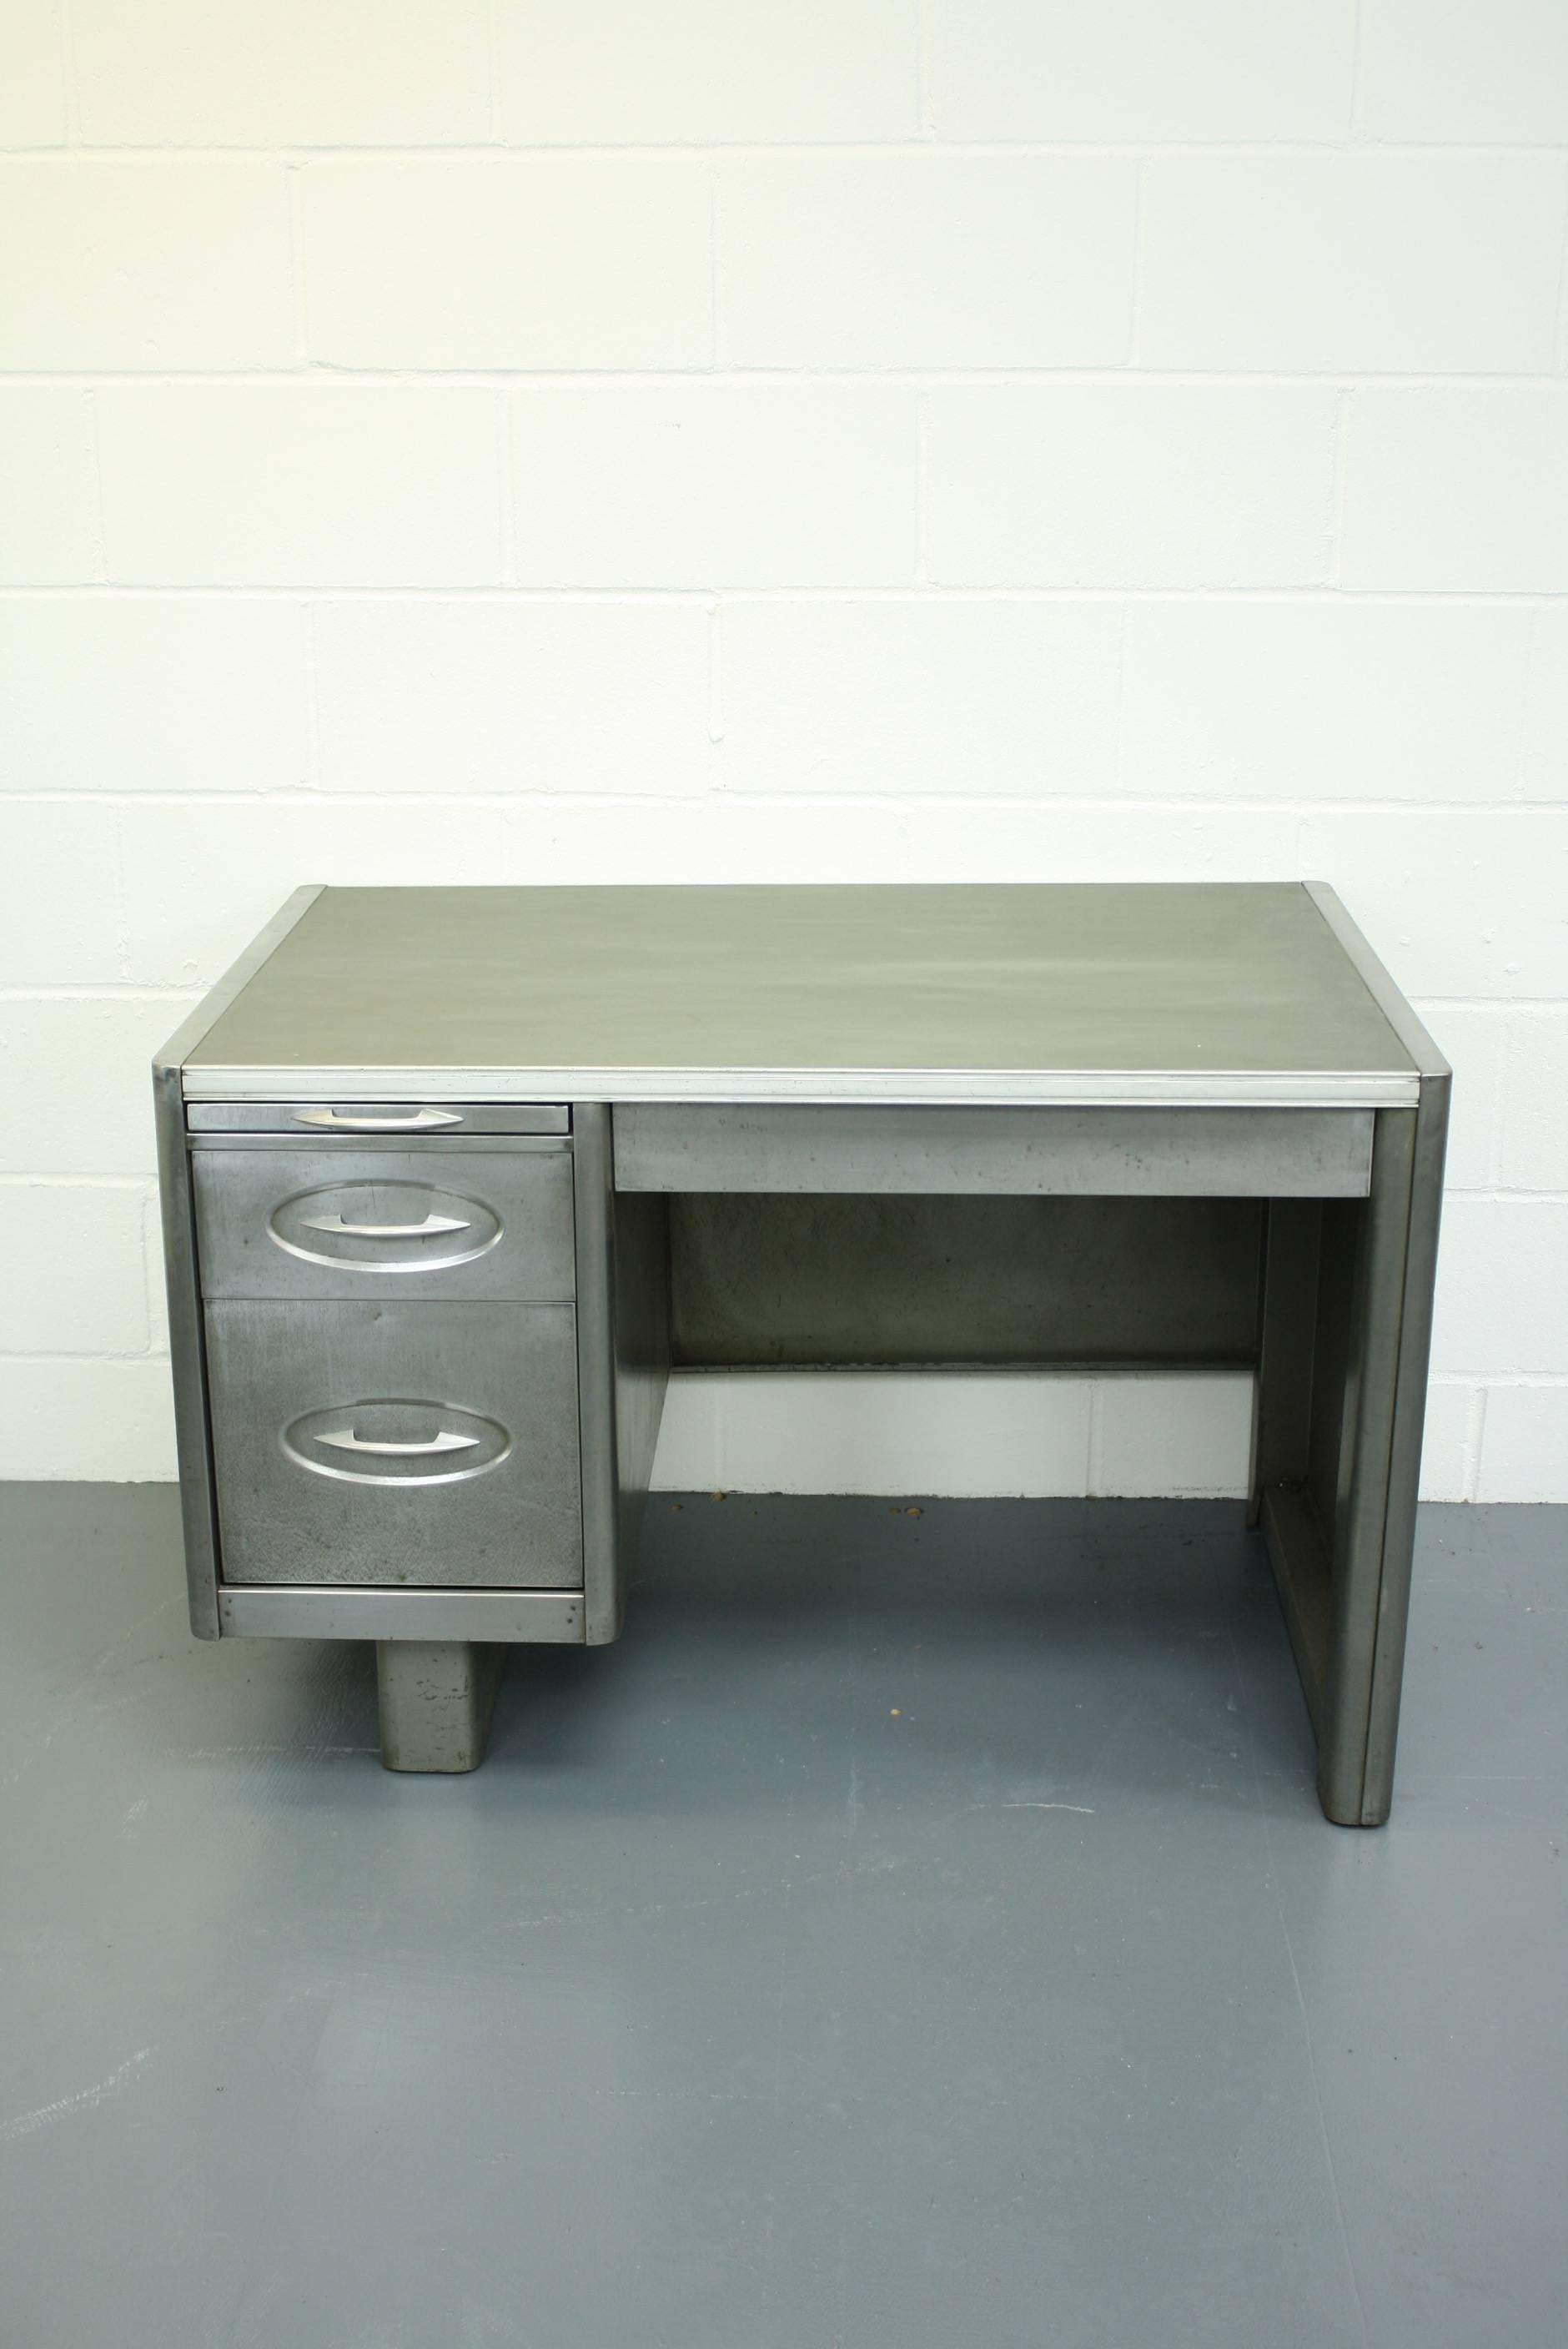 1950s stripped and polished steel desk with drawers and sliding shelf.

In good vintage condition - this piece comes from a working industrial environment and as such, has signs of wear and tear commensurate with age i.e bumps, scuffs etc, all